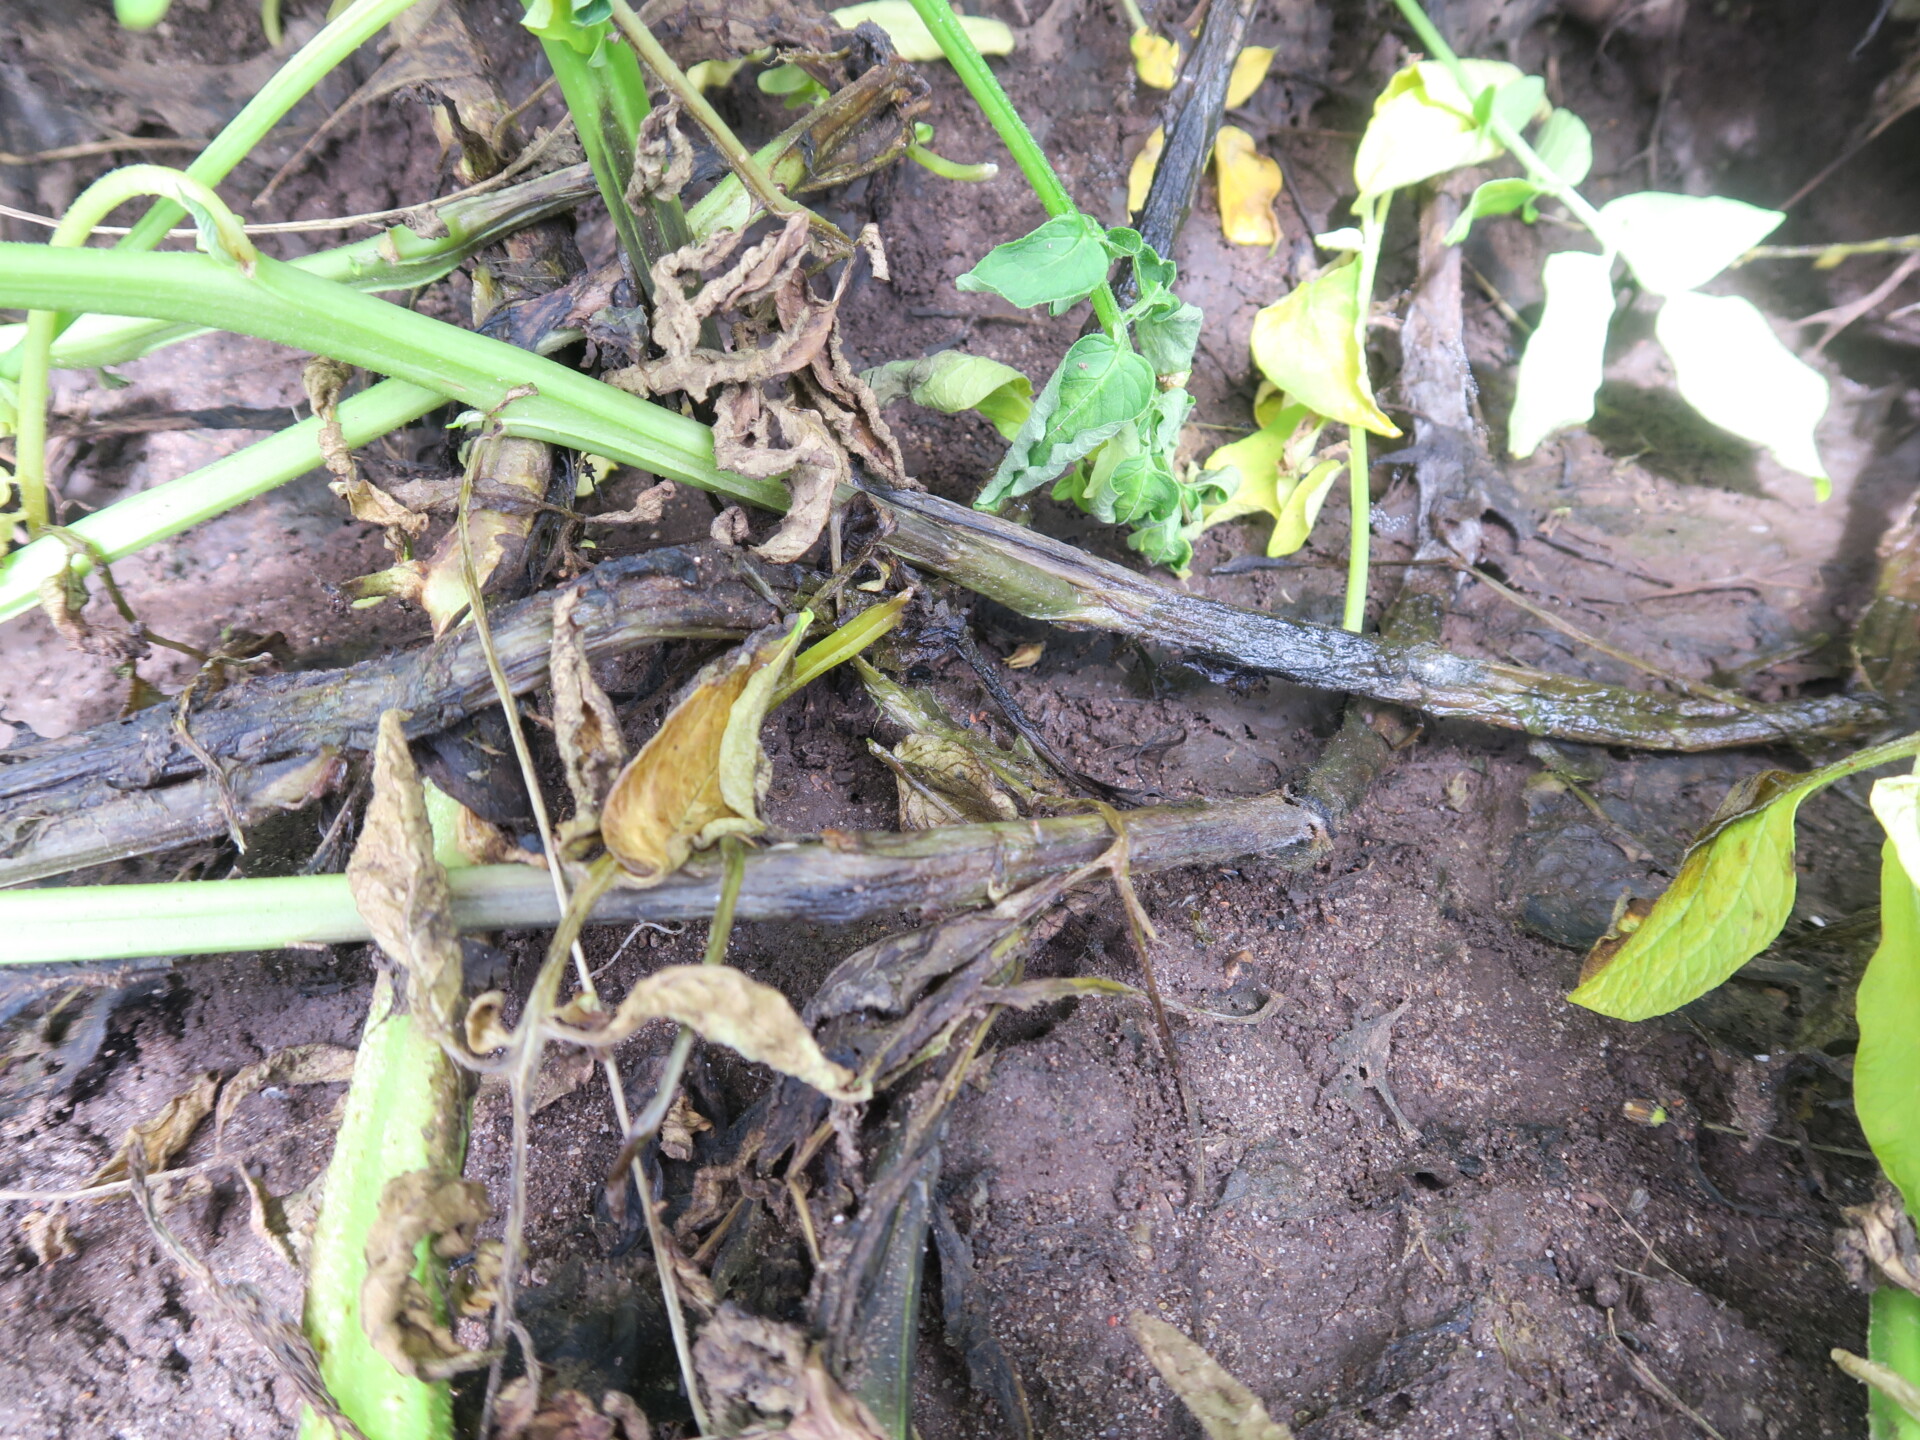 Base of potato plant affected with black leg.